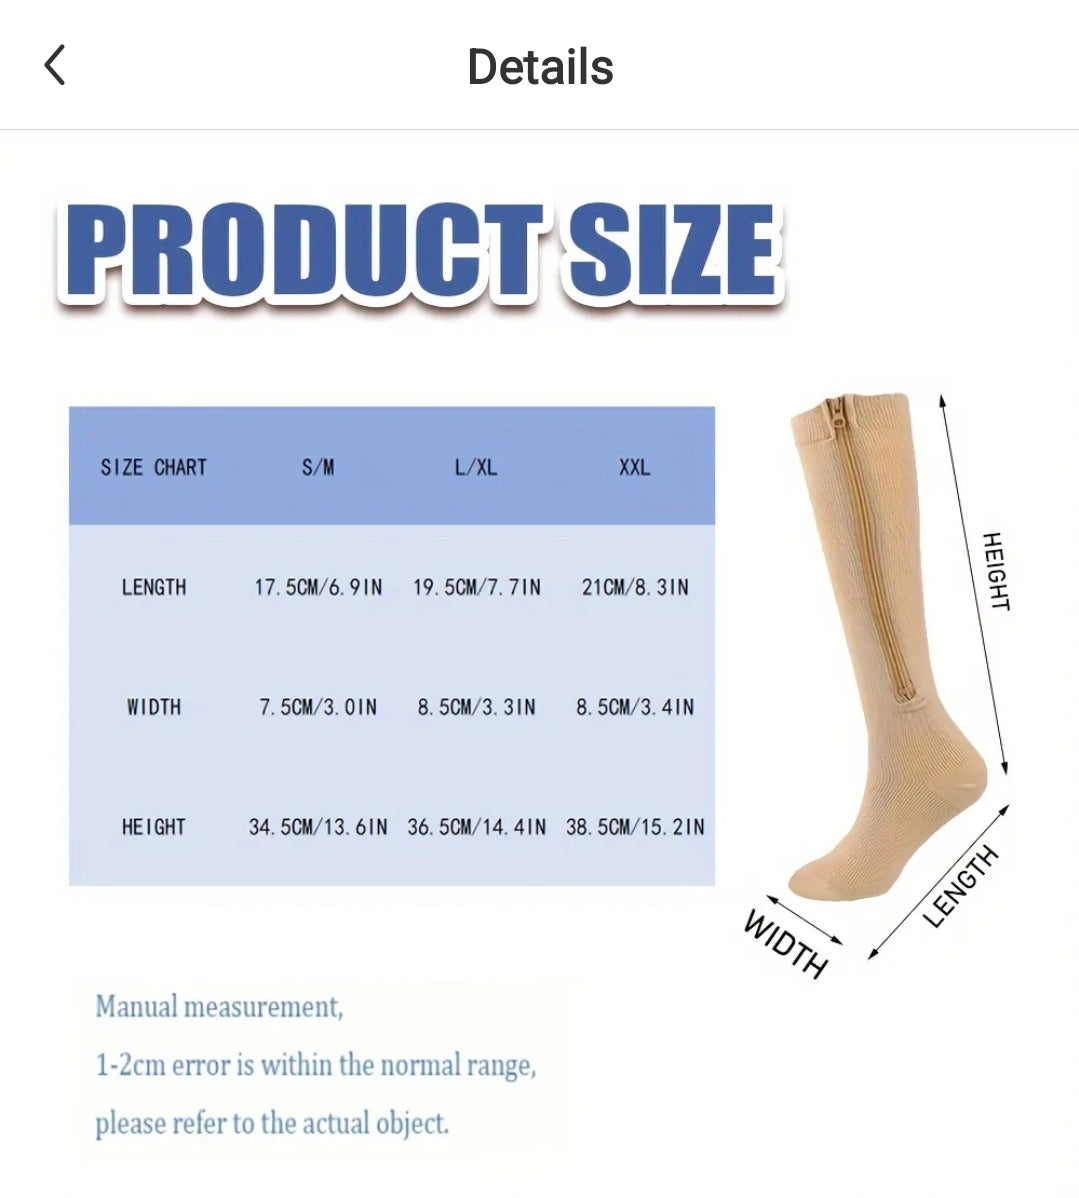 Compression Socks for Women and Men